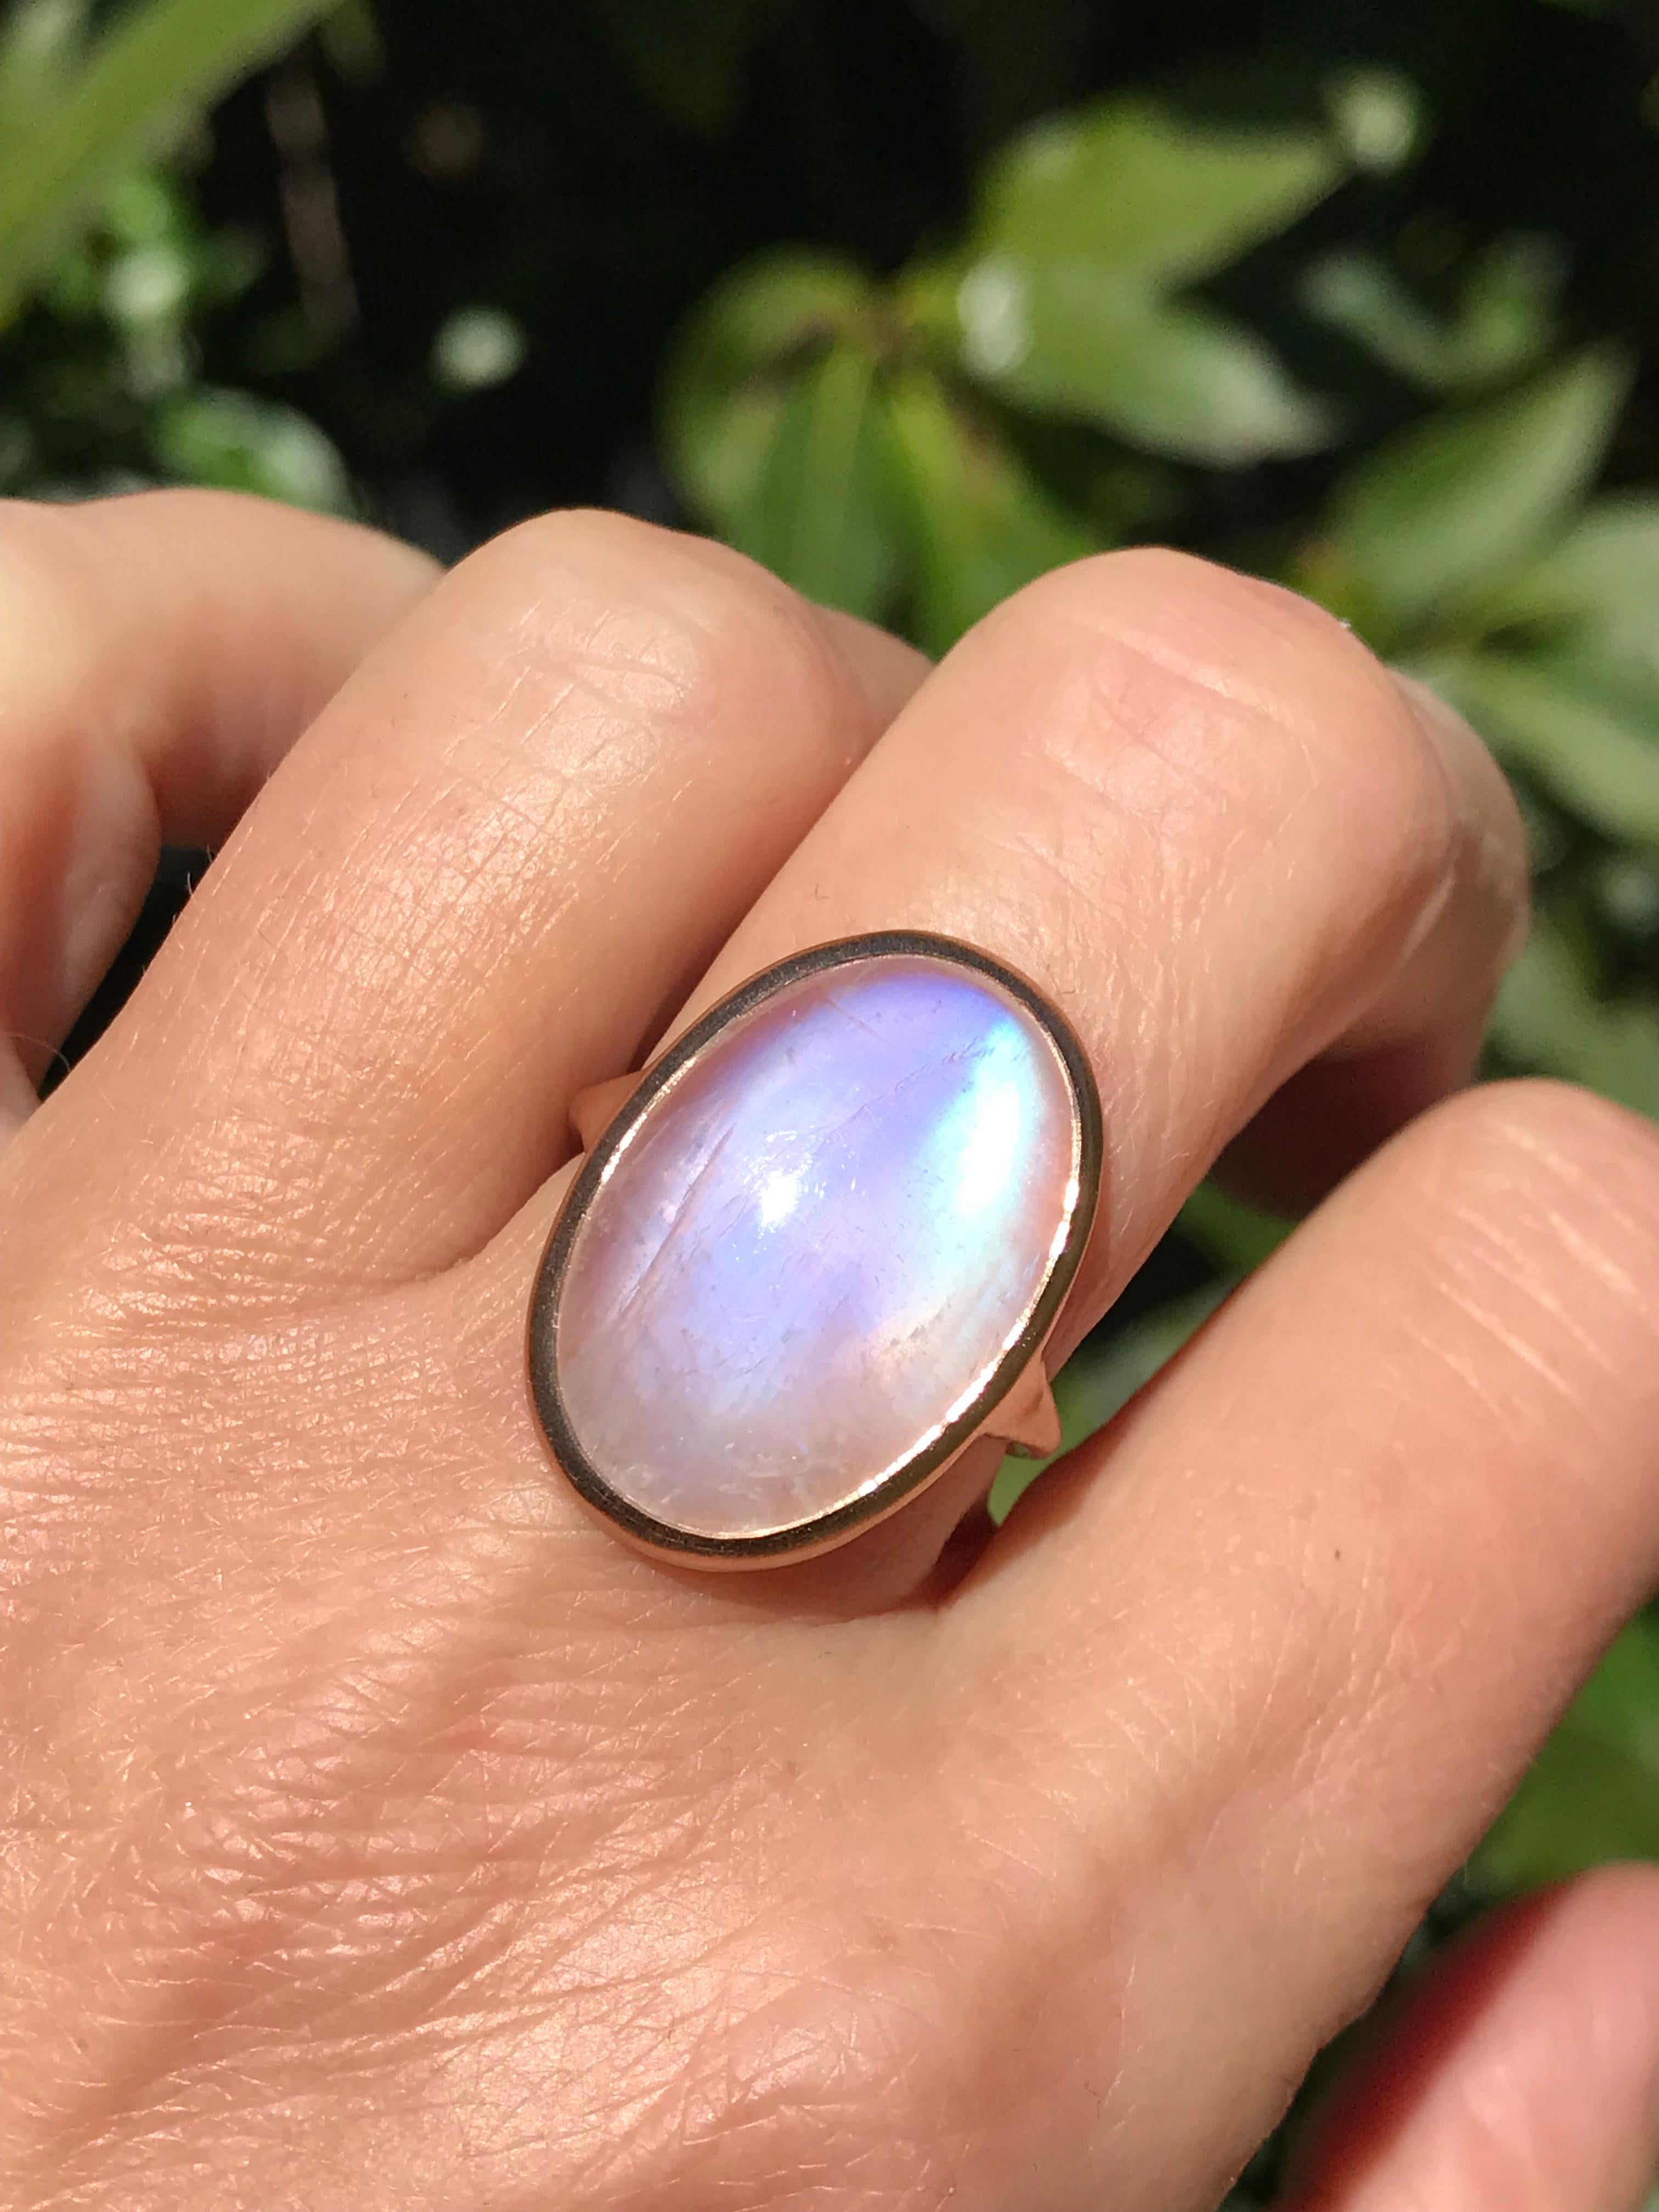 Dalben design One of a kind 18 kt rose  gold ring with an oval cabochon white moonstone weight 10,94 carats  .
The white moonstone has  wonderful blue reflex 
Ring size  US 7 1/4   - EU 55 re-sizable .  
Bezels setting dimension:  
max width 16,2